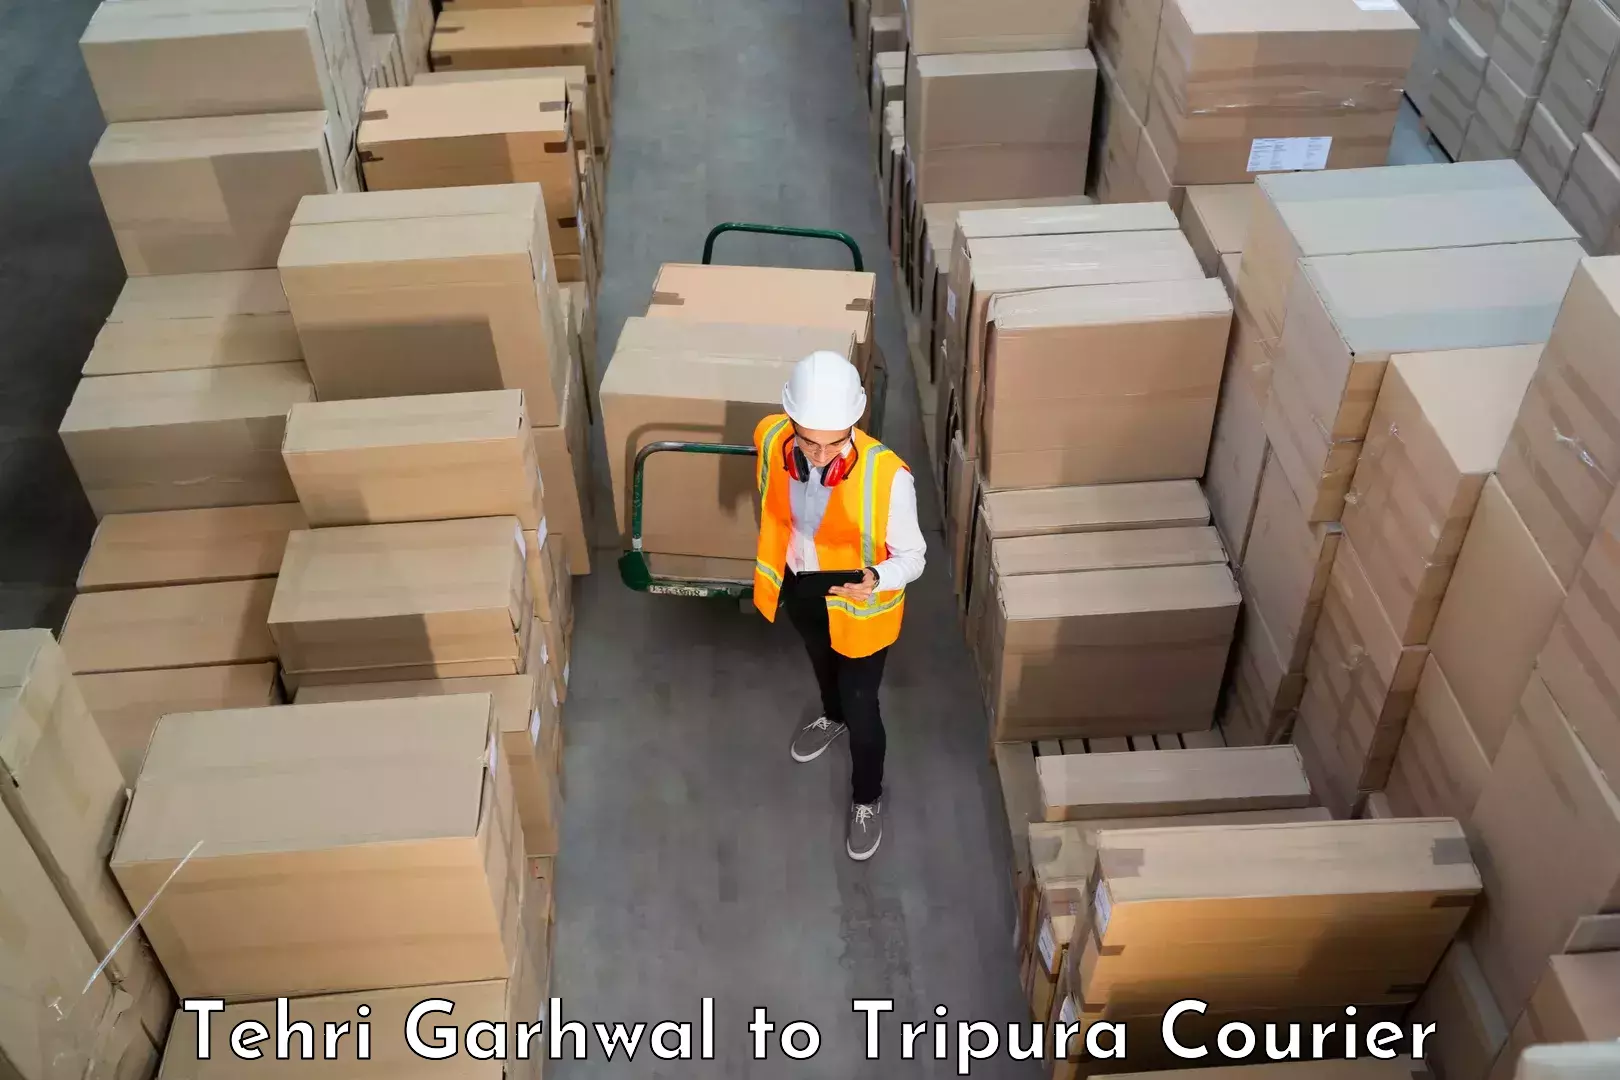 Professional packing and transport Tehri Garhwal to Udaipur Tripura